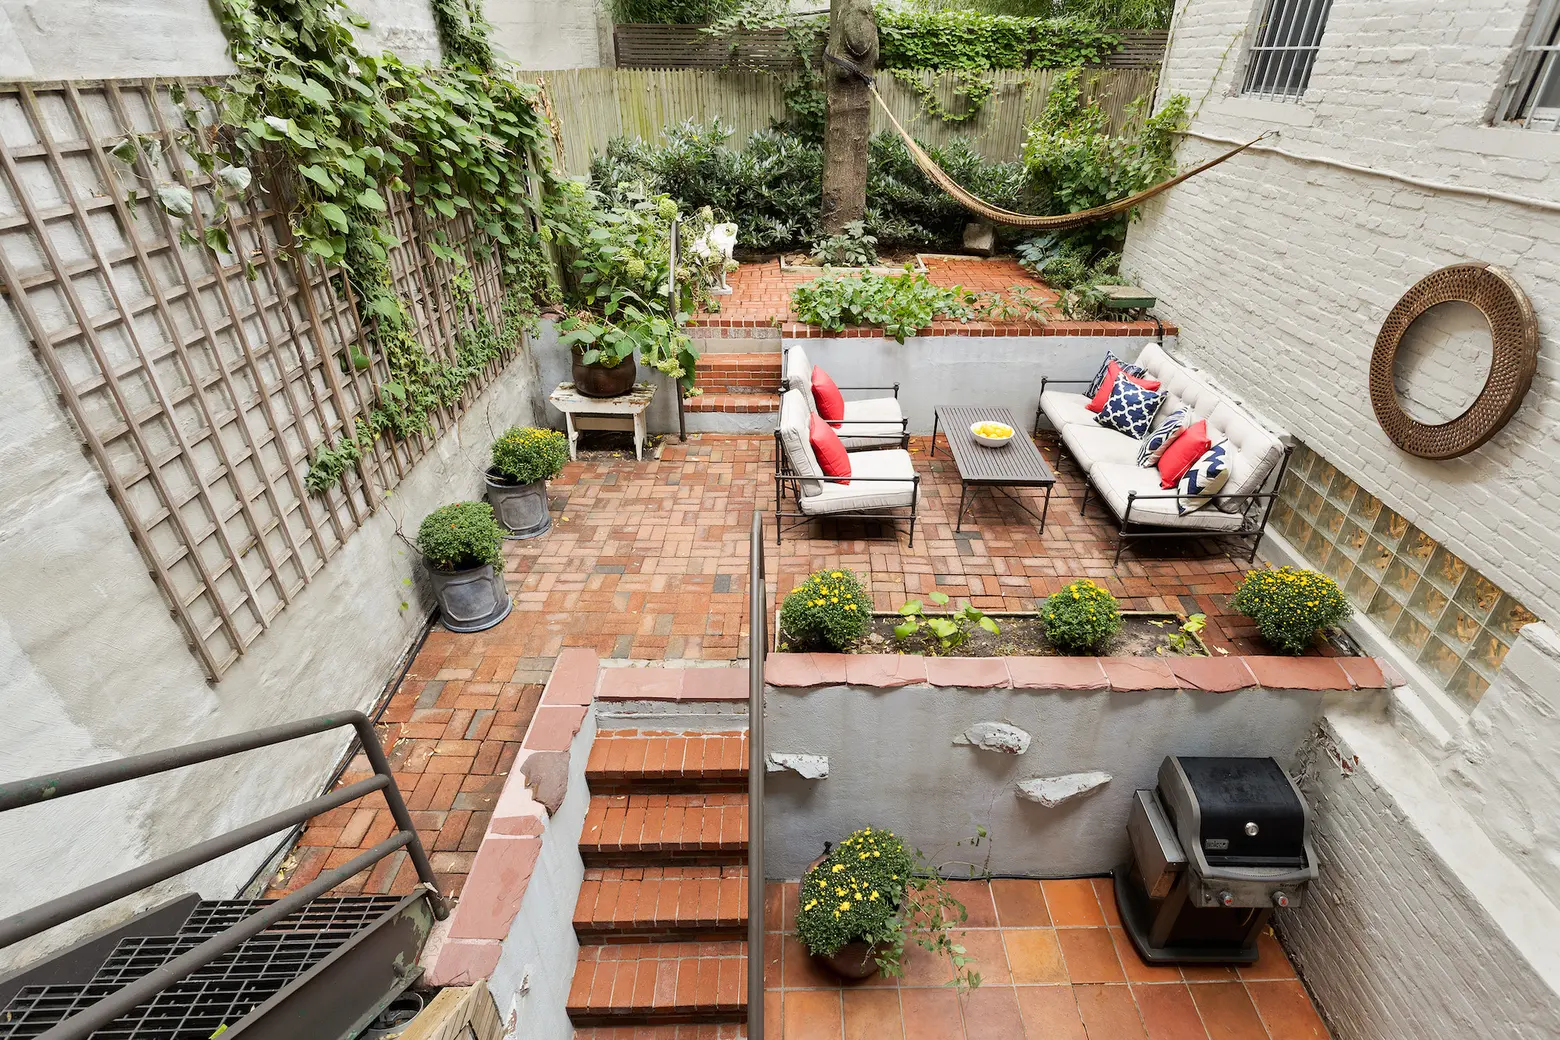 A three-level garden and a bonus room make this East Village co-op worth the $1.9M ask